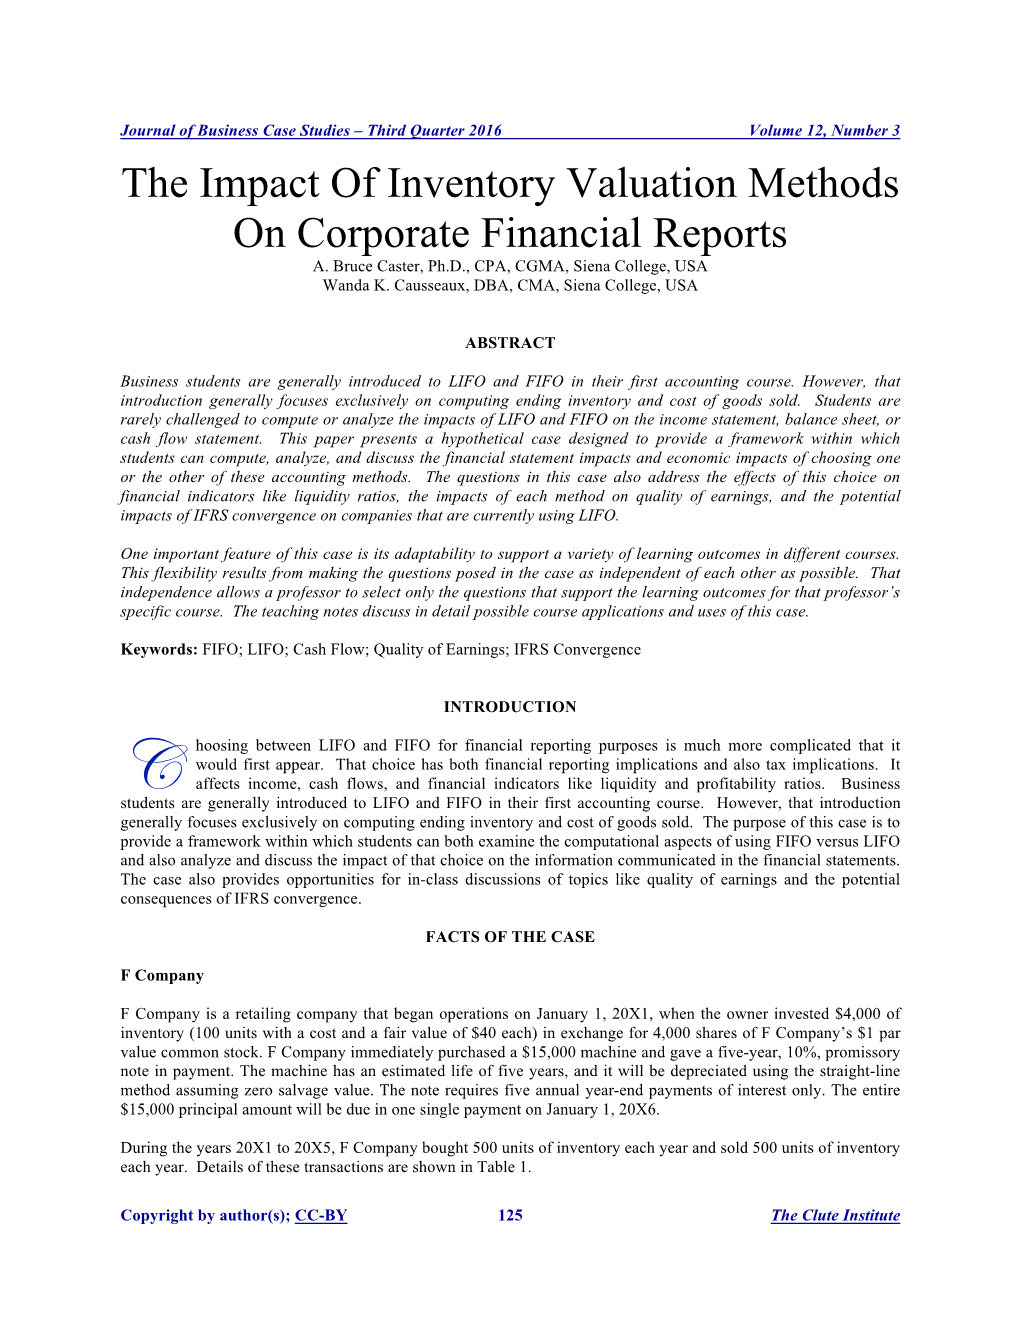 The Impact of Inventory Valuation Methods on Corporate Financial Reports A